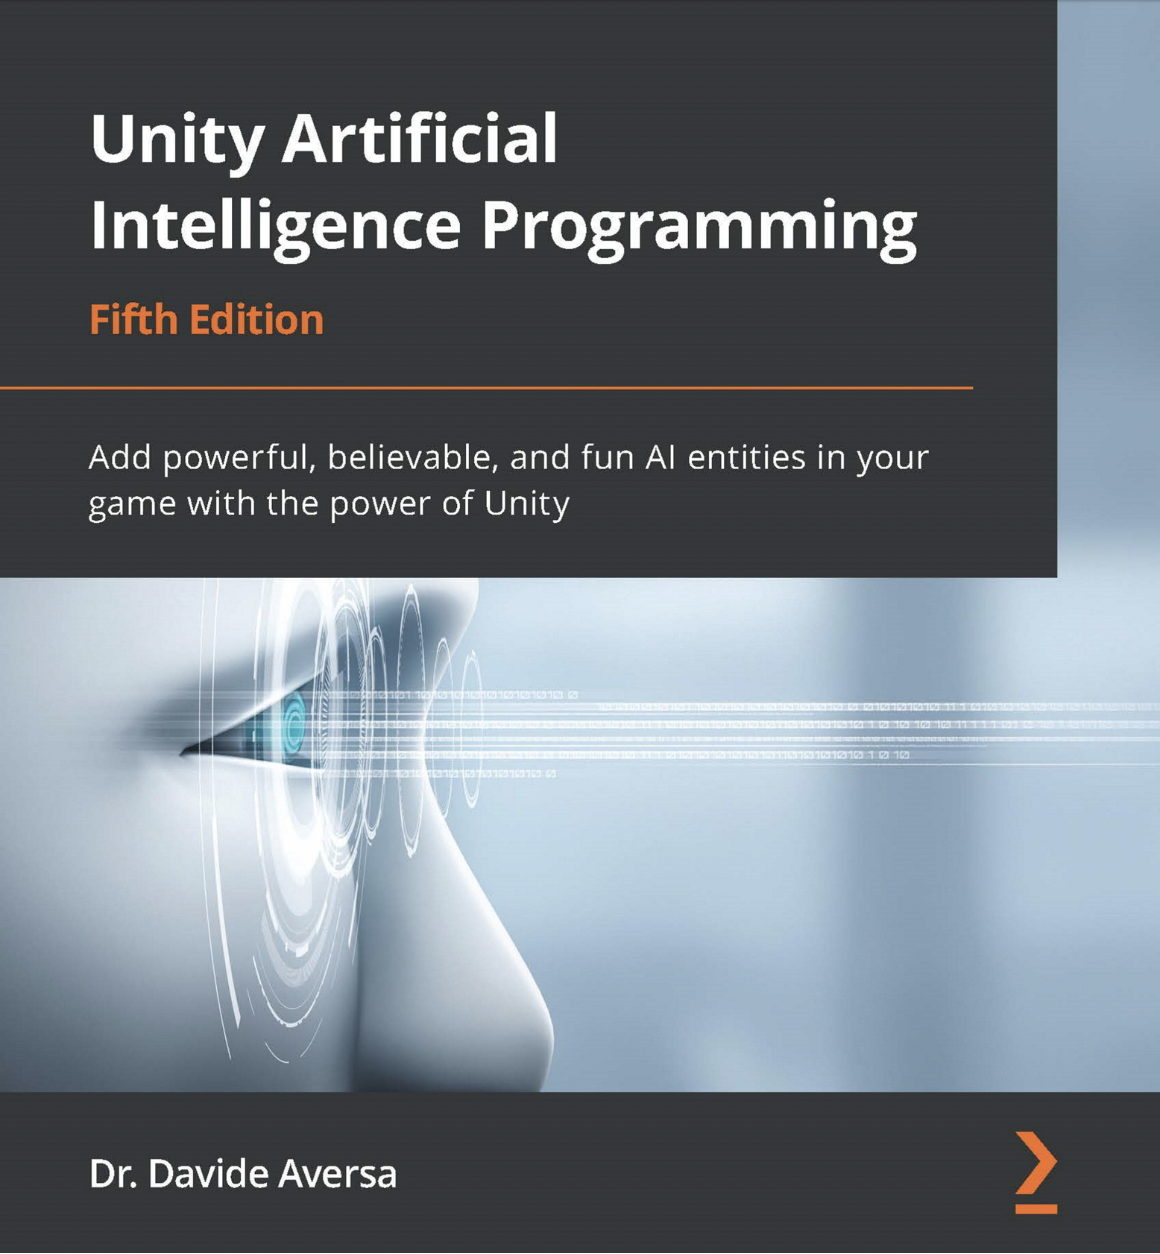 Featured Image for Unity Artificial Intelligence Programming – Fifth Edition